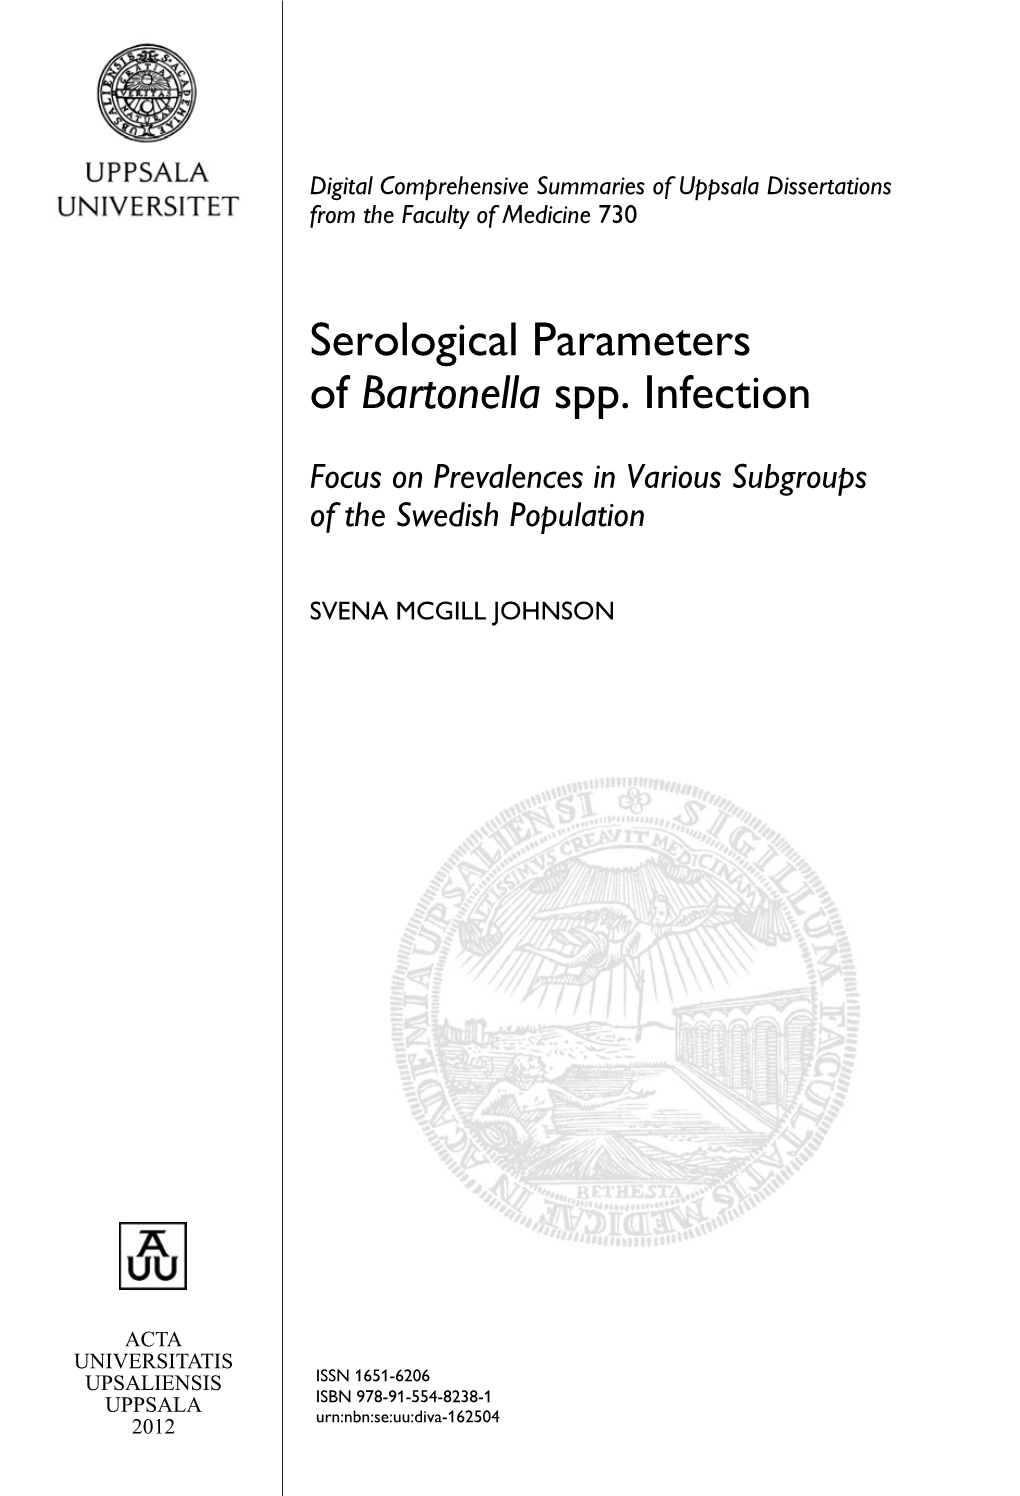 Serological Parameters of Bartonella Spp. Infection